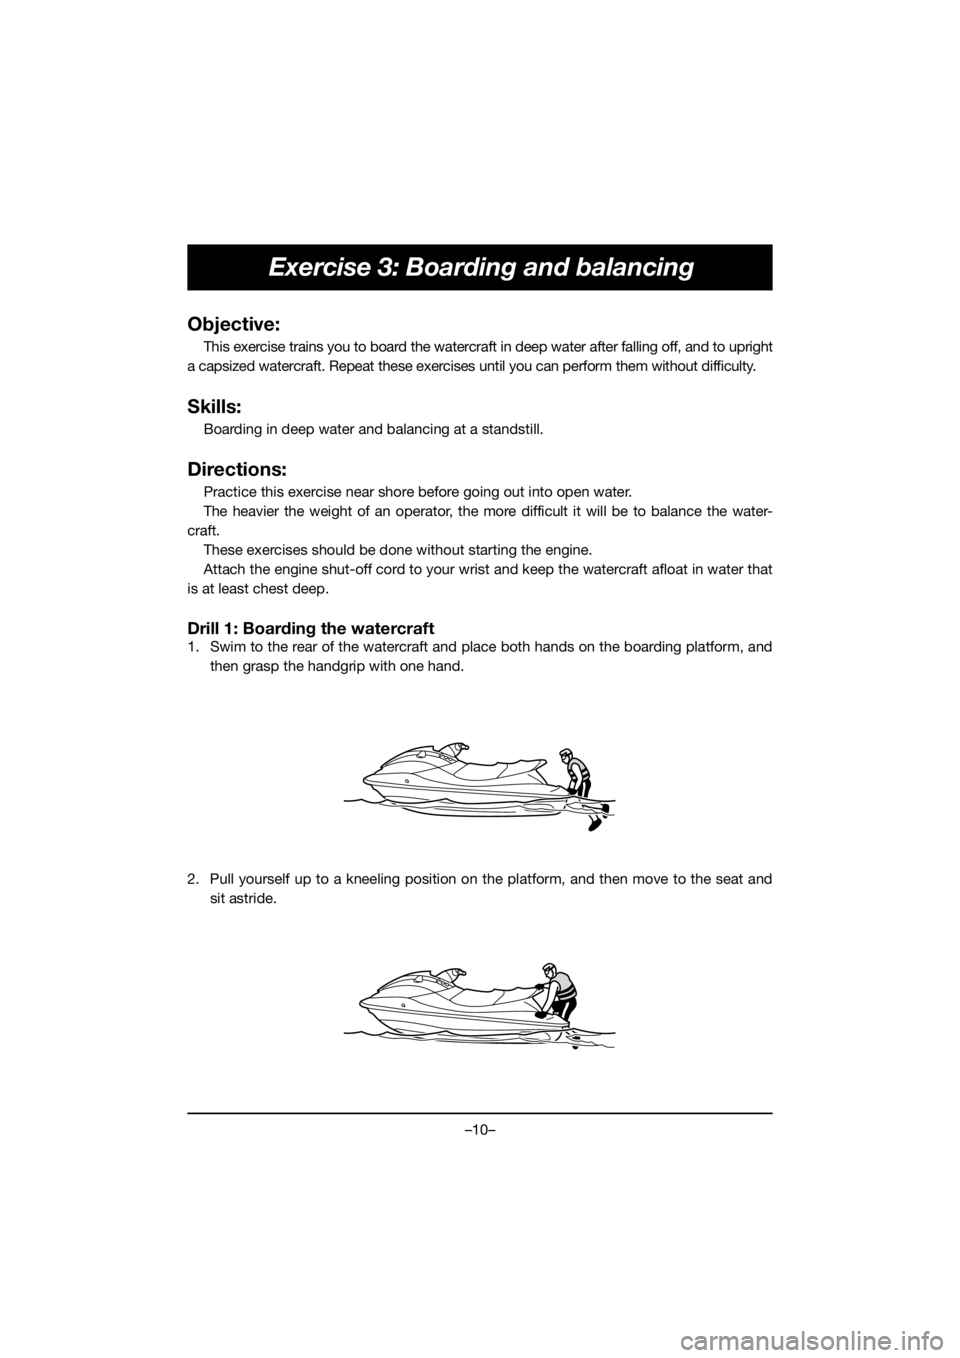 YAMAHA EXR 2020  Betriebsanleitungen (in German) –10–
Exercise 3: Boarding and balancing
Objective:
This exercise trains you to board the watercraft in deep water after falling off, and to upright
a capsized watercraft. Repeat these exercises un